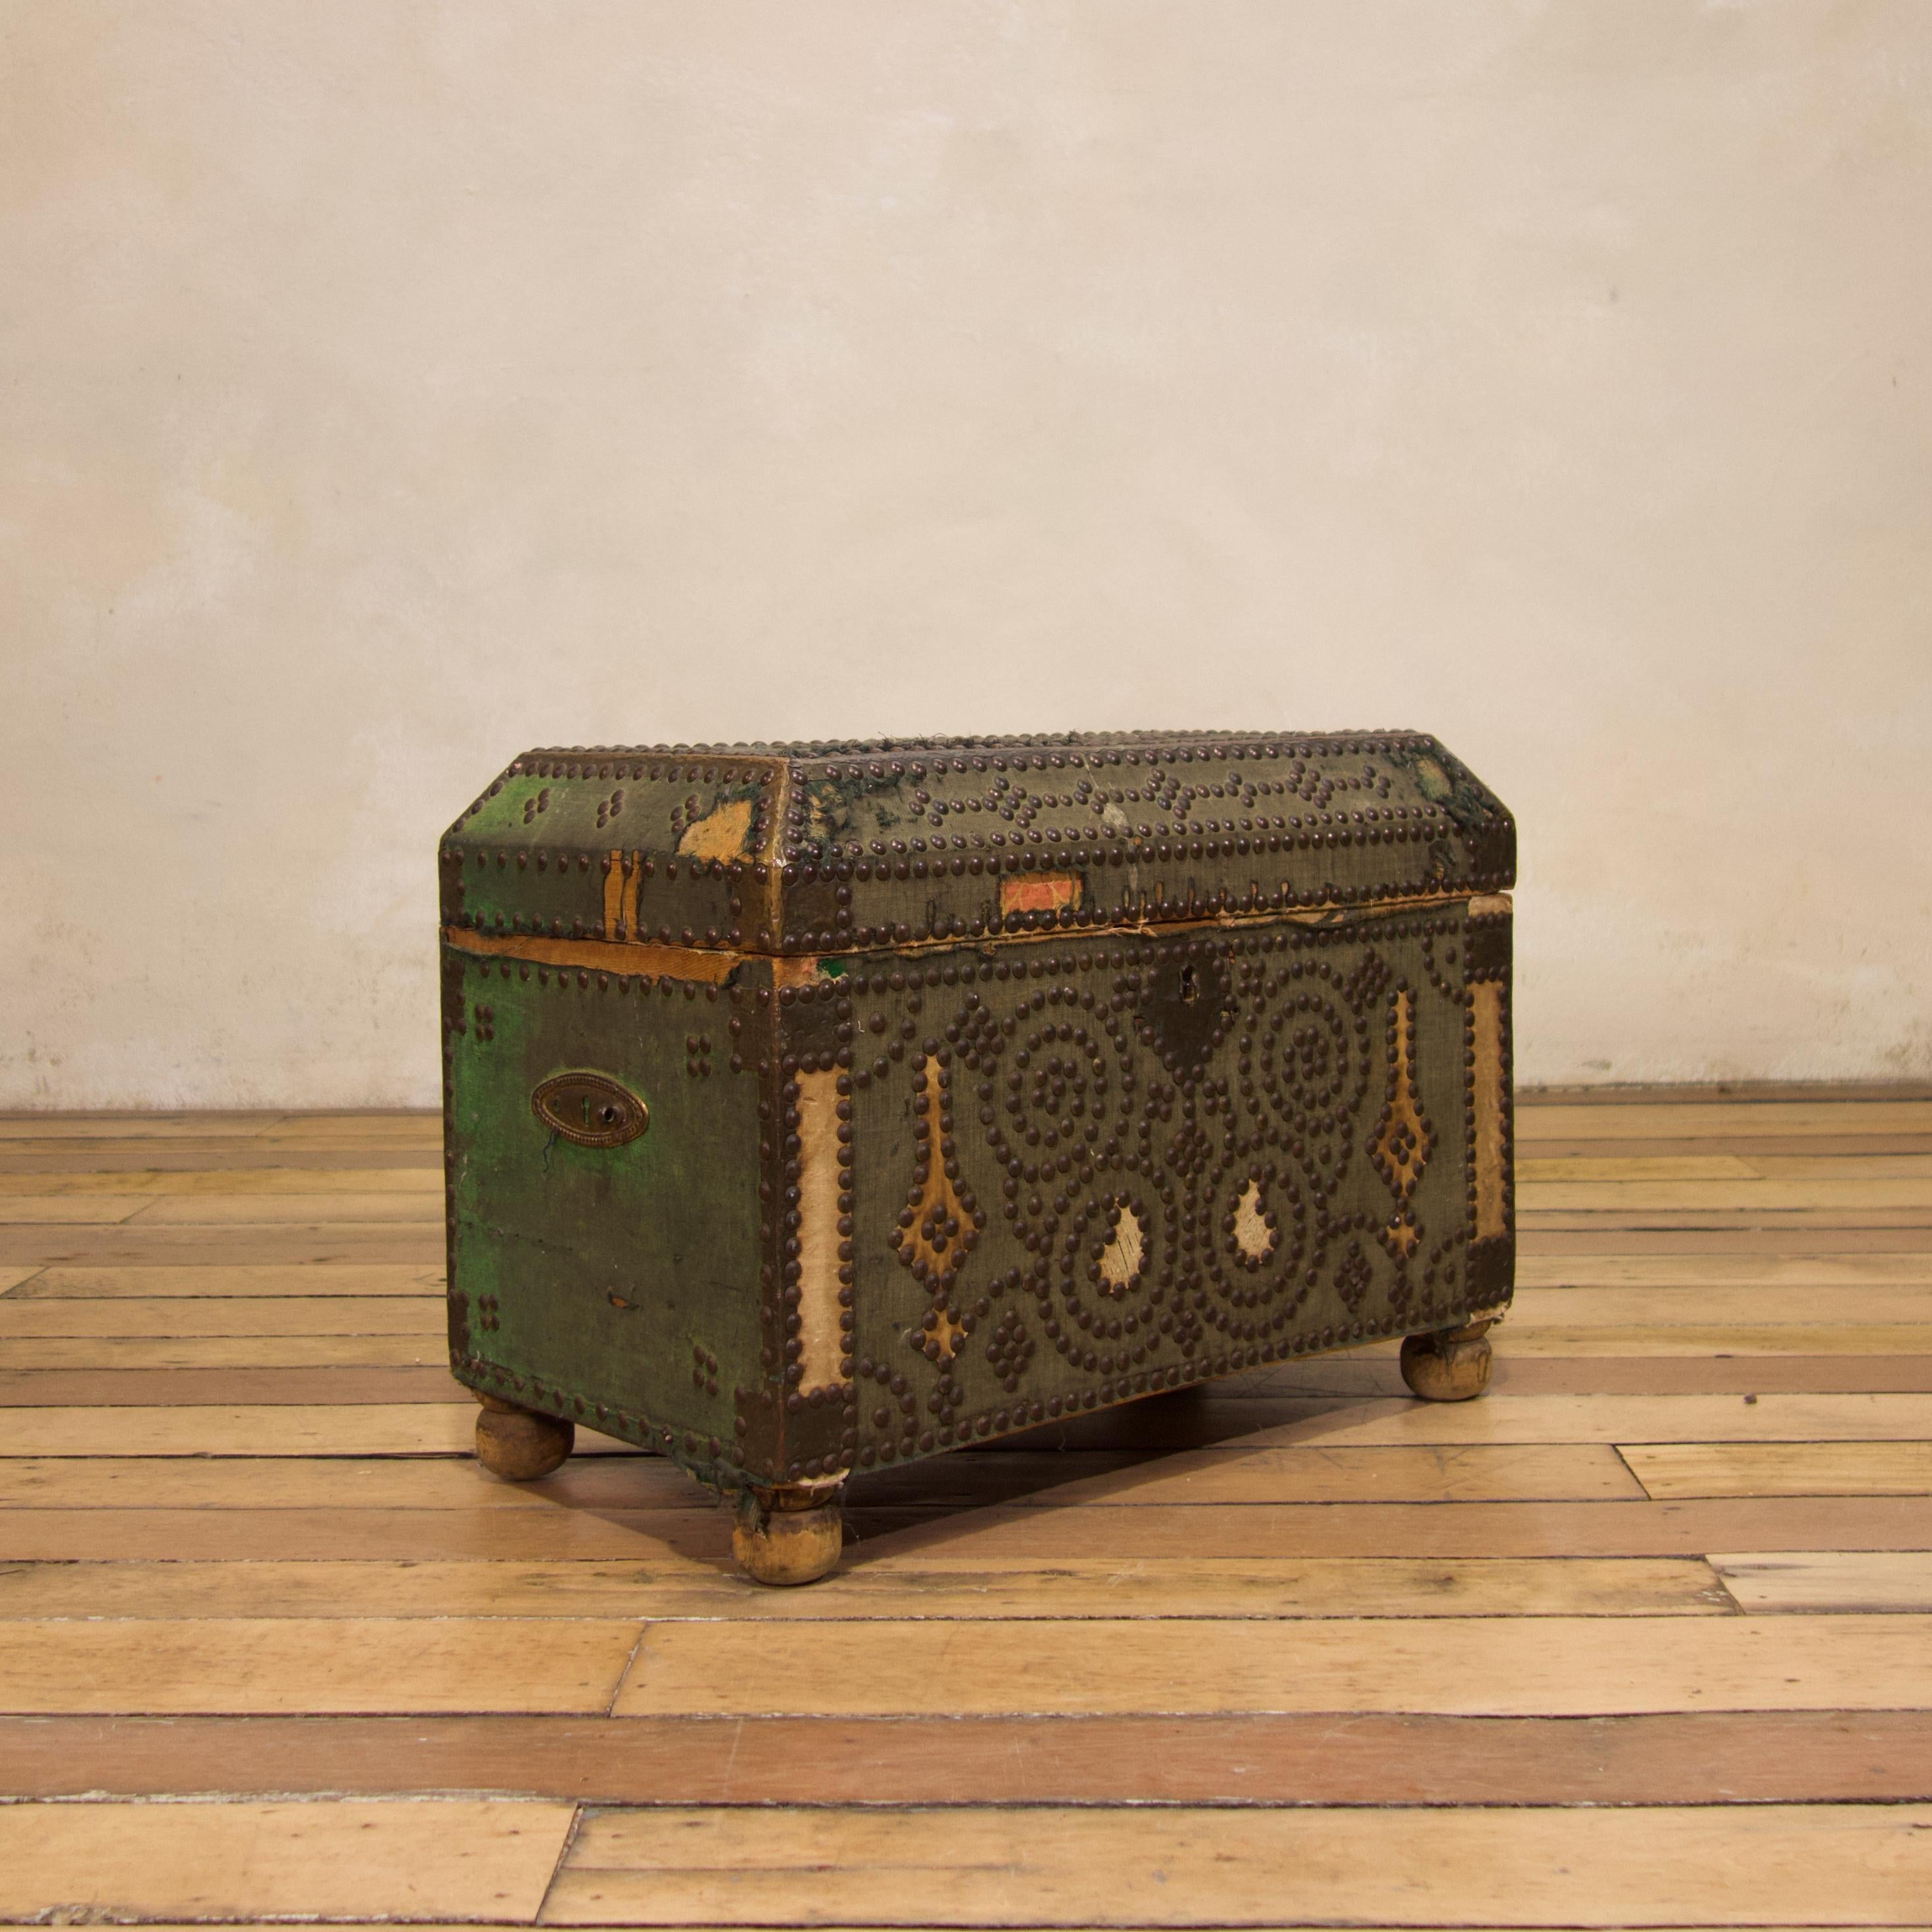 A small 19th century French studded and cloth-bound chest. Covered in the original green and white cloth decorated with brass studs and brass bound edges. Displaying a domed top, raised on bun feet. A charming small trunk that would lend itself